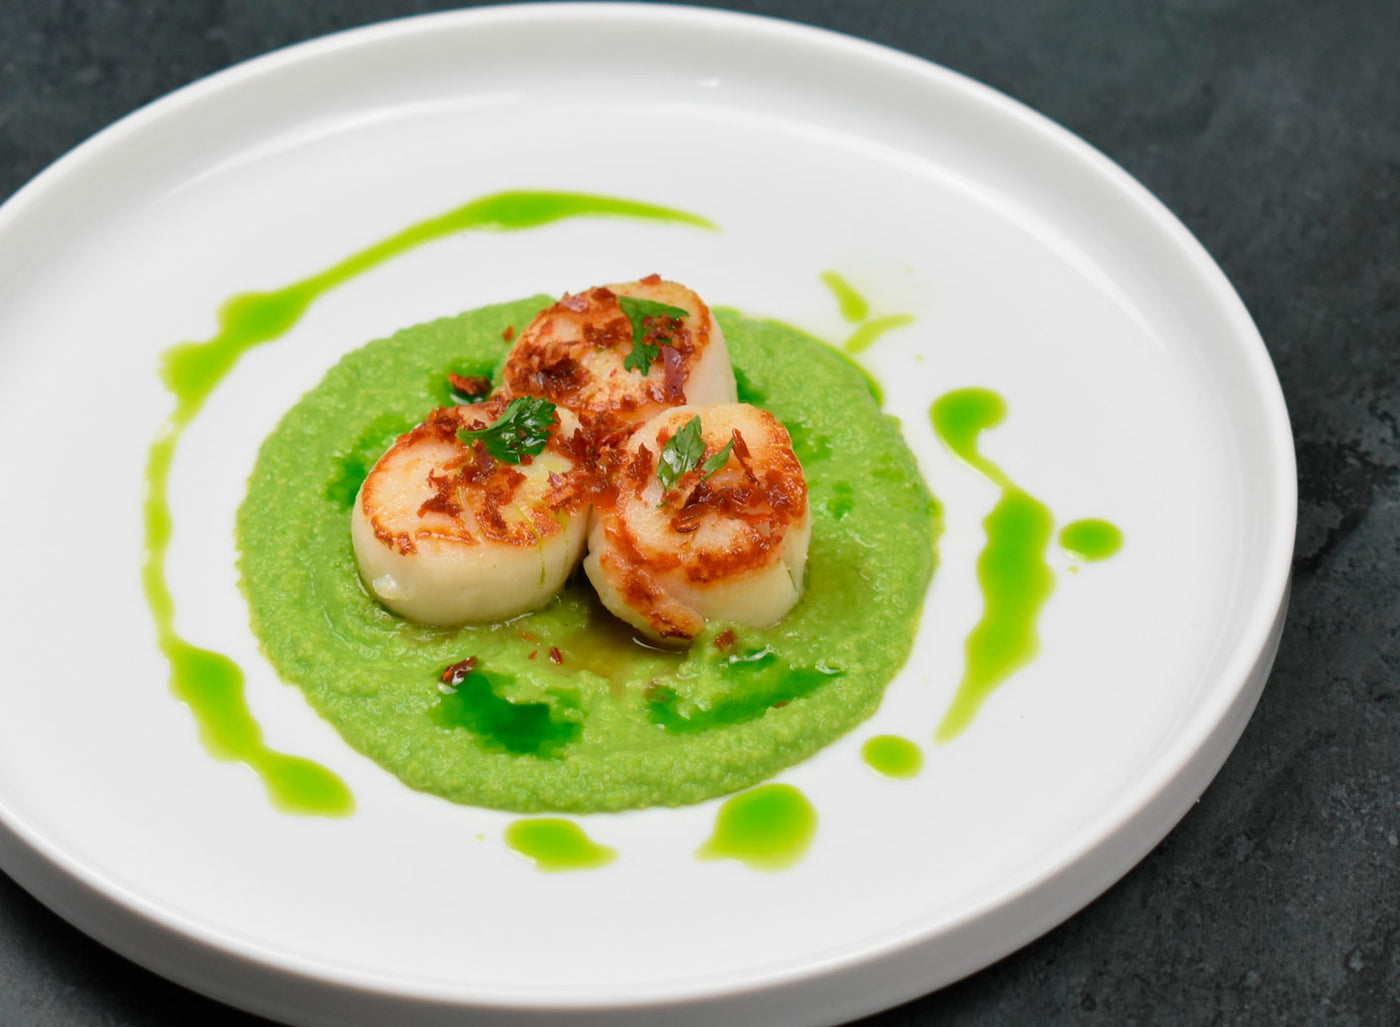 Parsley Herb Oil, Scallops, Pea Purée and Prosciutto